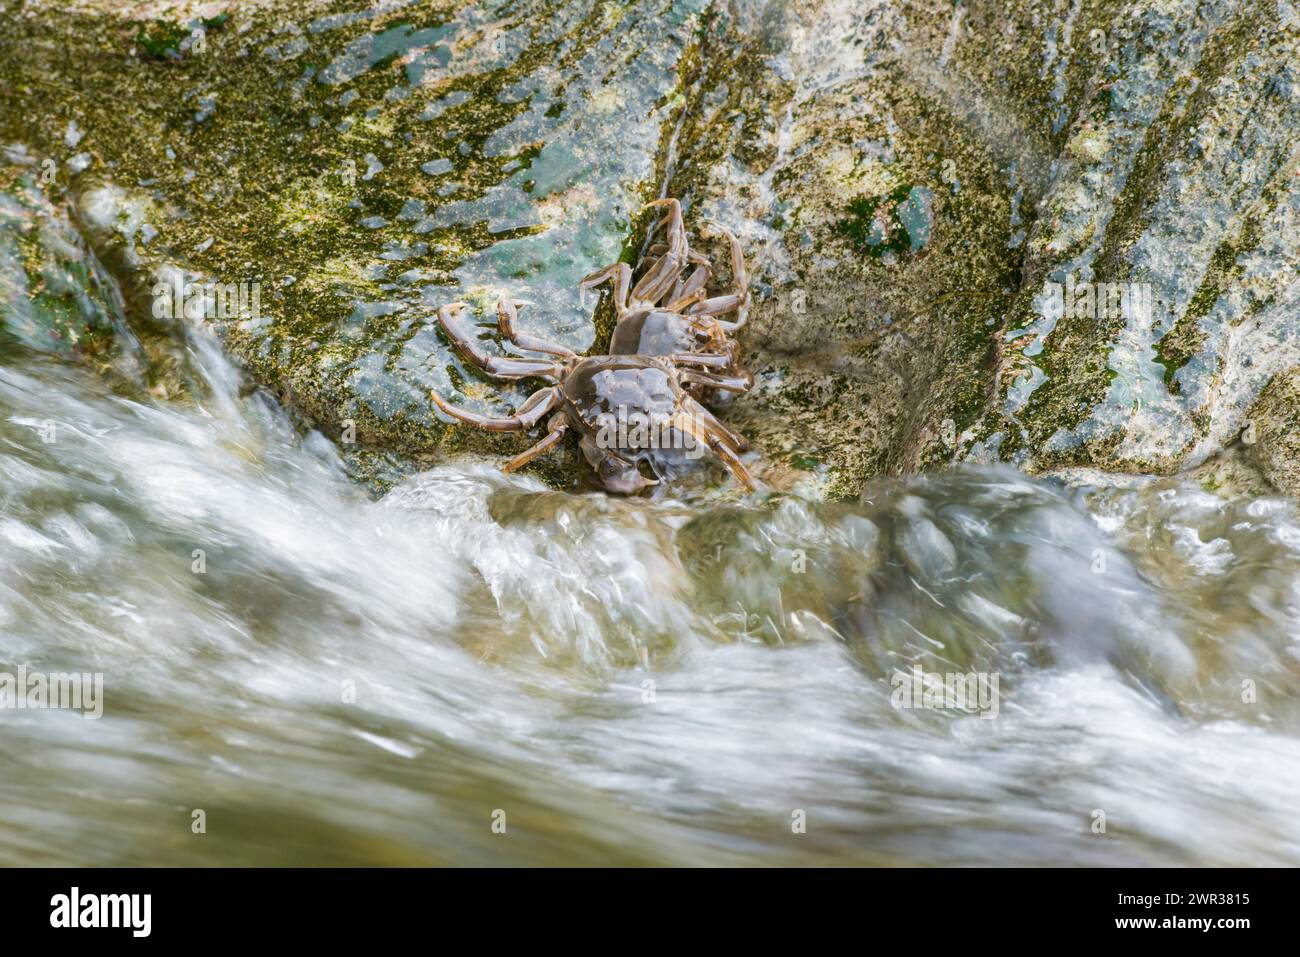 Two chinese mitten crab (Eriocheir sinensis), invasive species, neozoon, crabs, young animals cling to a rock on their migration upstream, flowing Stock Photo